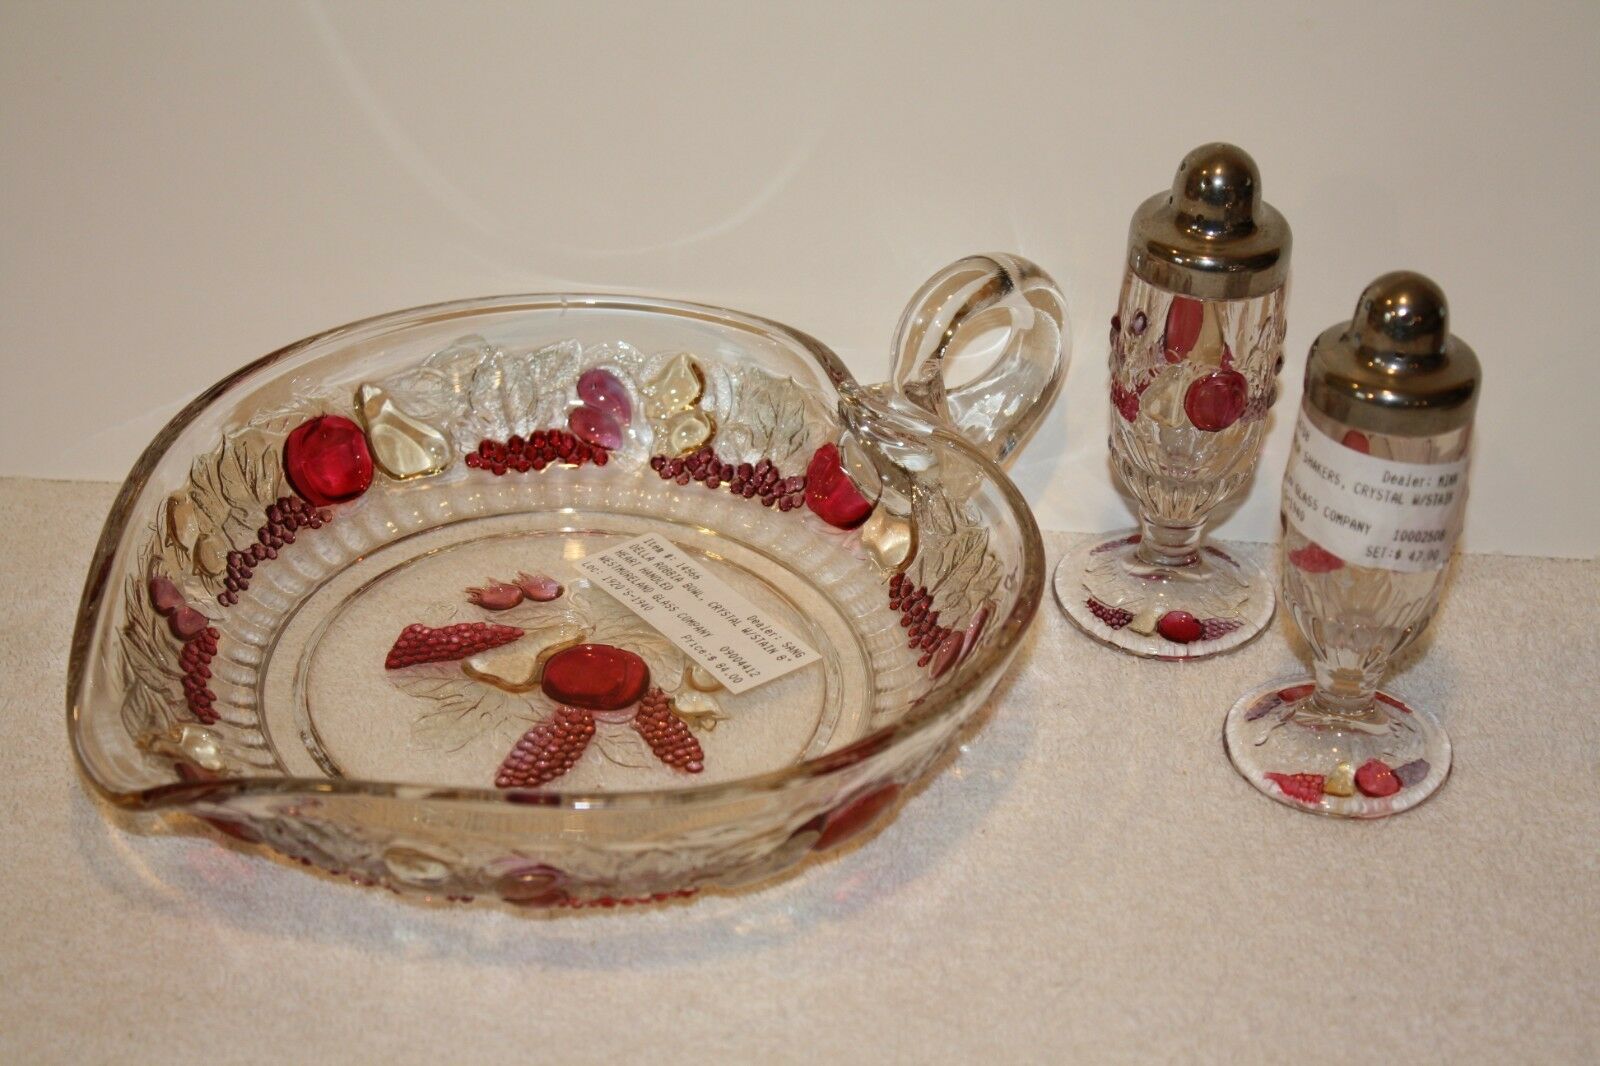 Della Robbia Crystal With Stain 8" Heart-handled Bowl And Set Of Shakers